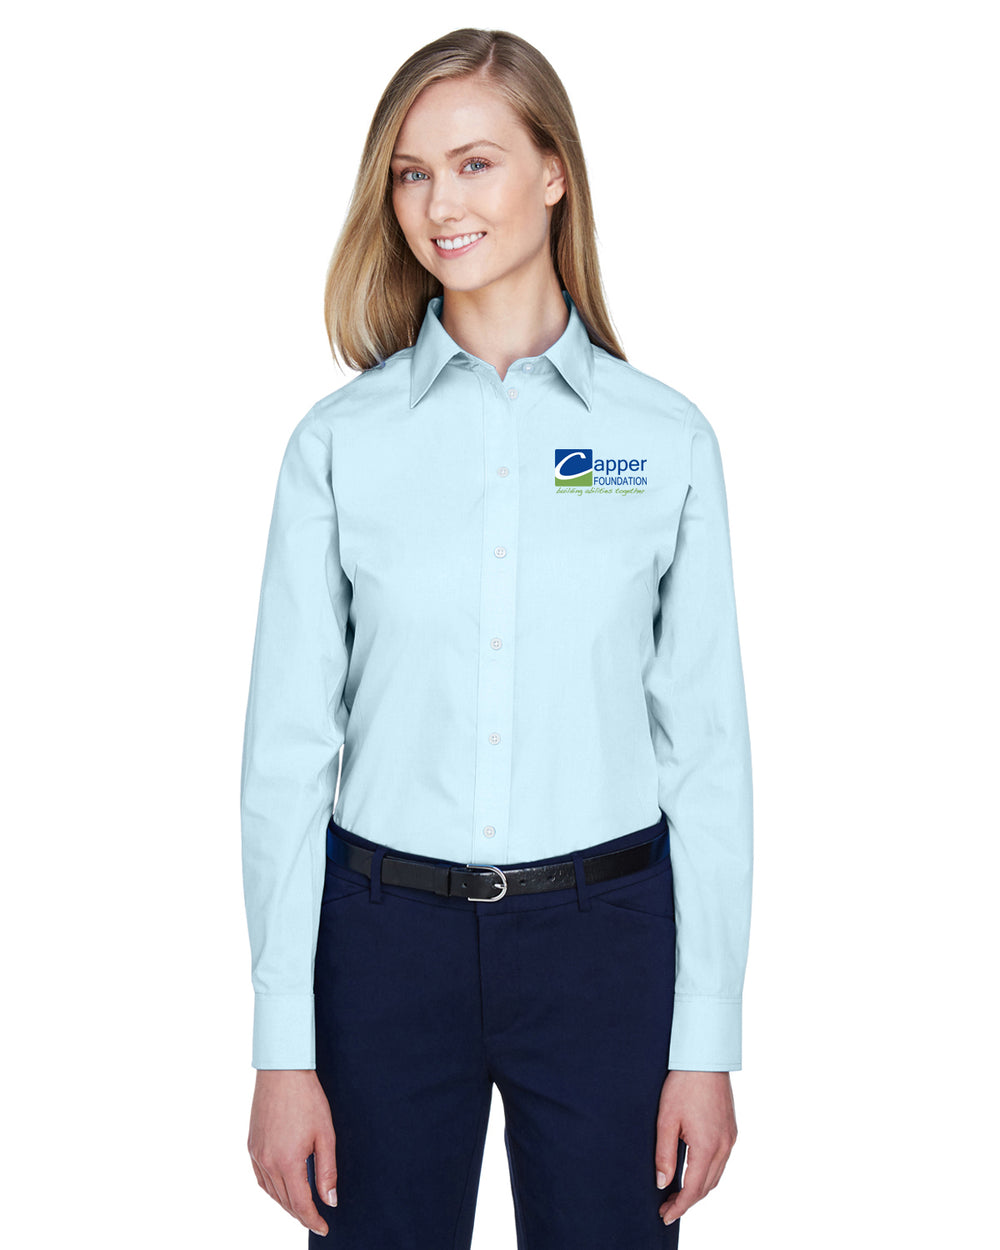 Capper Foundation - Ladies' Crown Collection Solid Broadcloth Woven Shirt - D620W